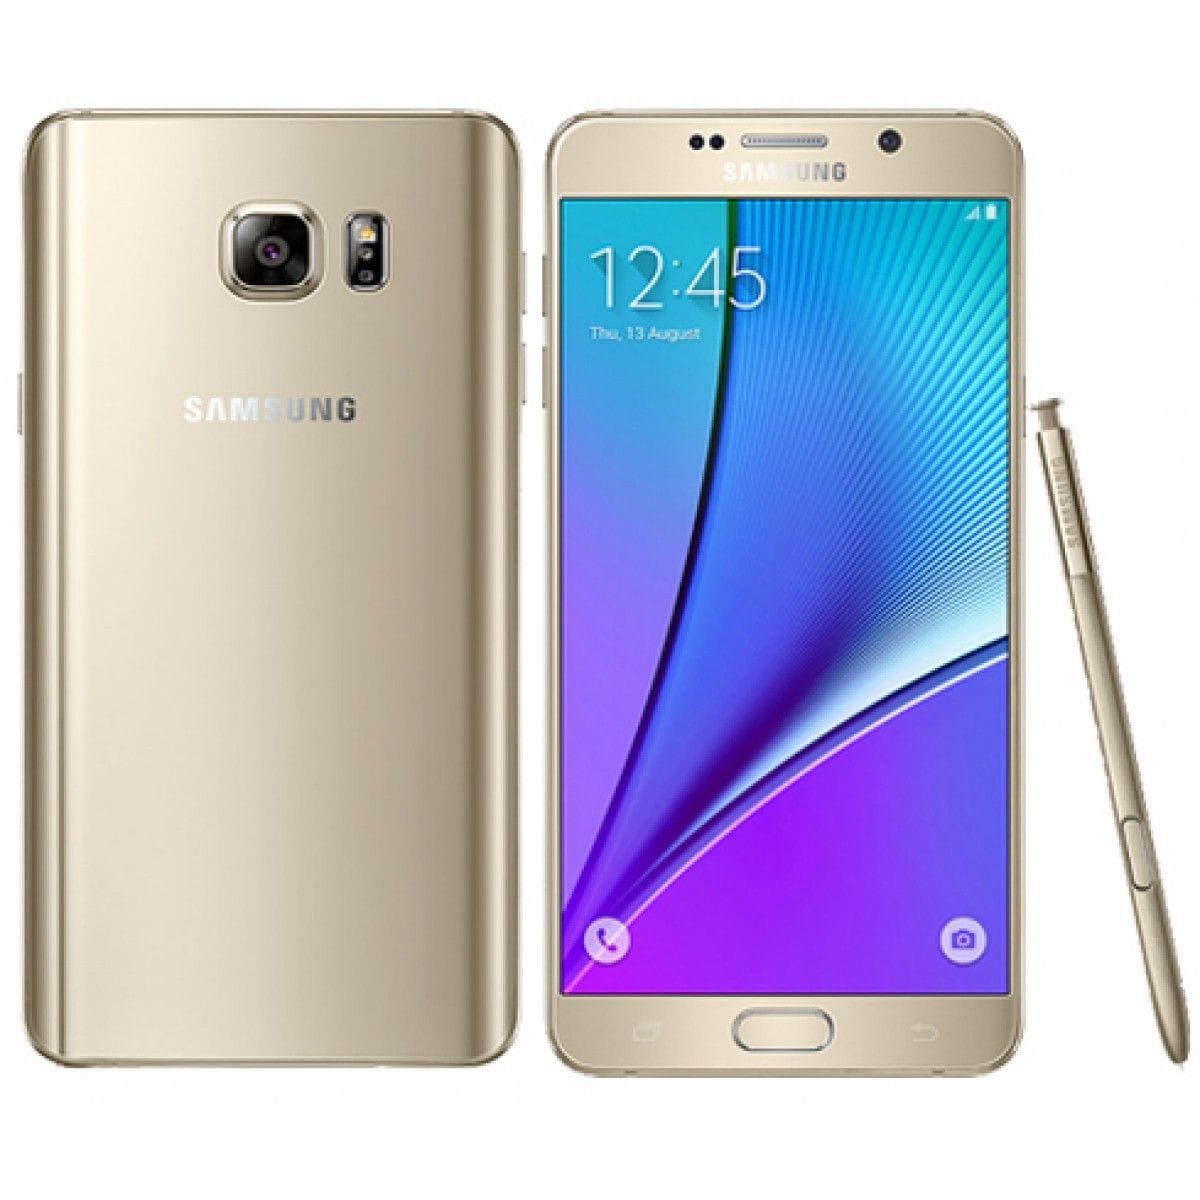 Samsung Galaxy Note5 - 32 GB - Platinum Gold - T-Mobile - GSM